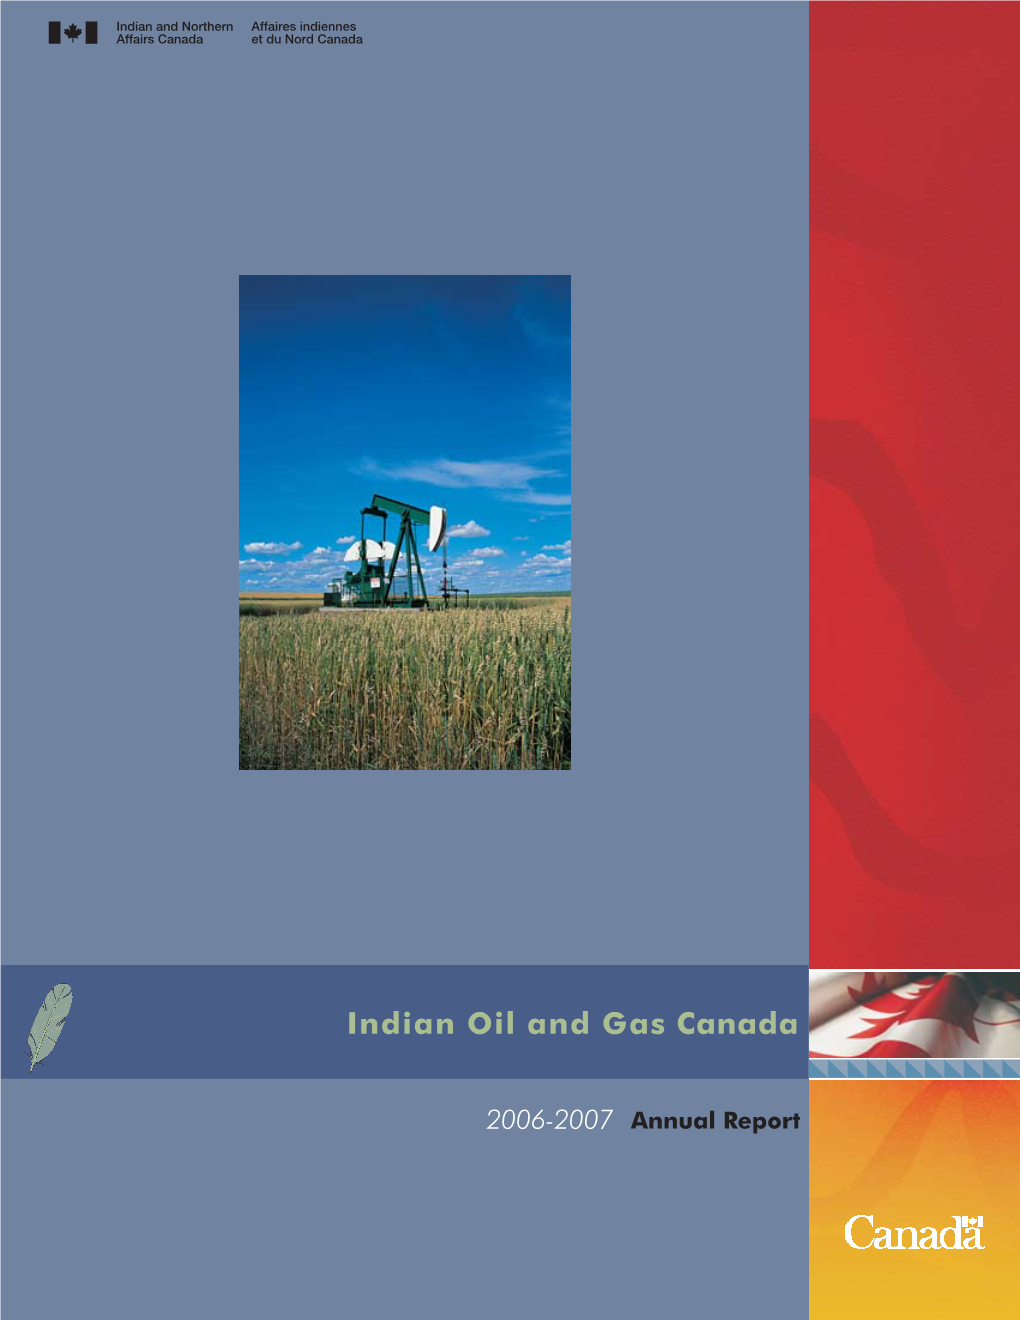 Indian Oil and Gas Canada Annual Report 2006-2007